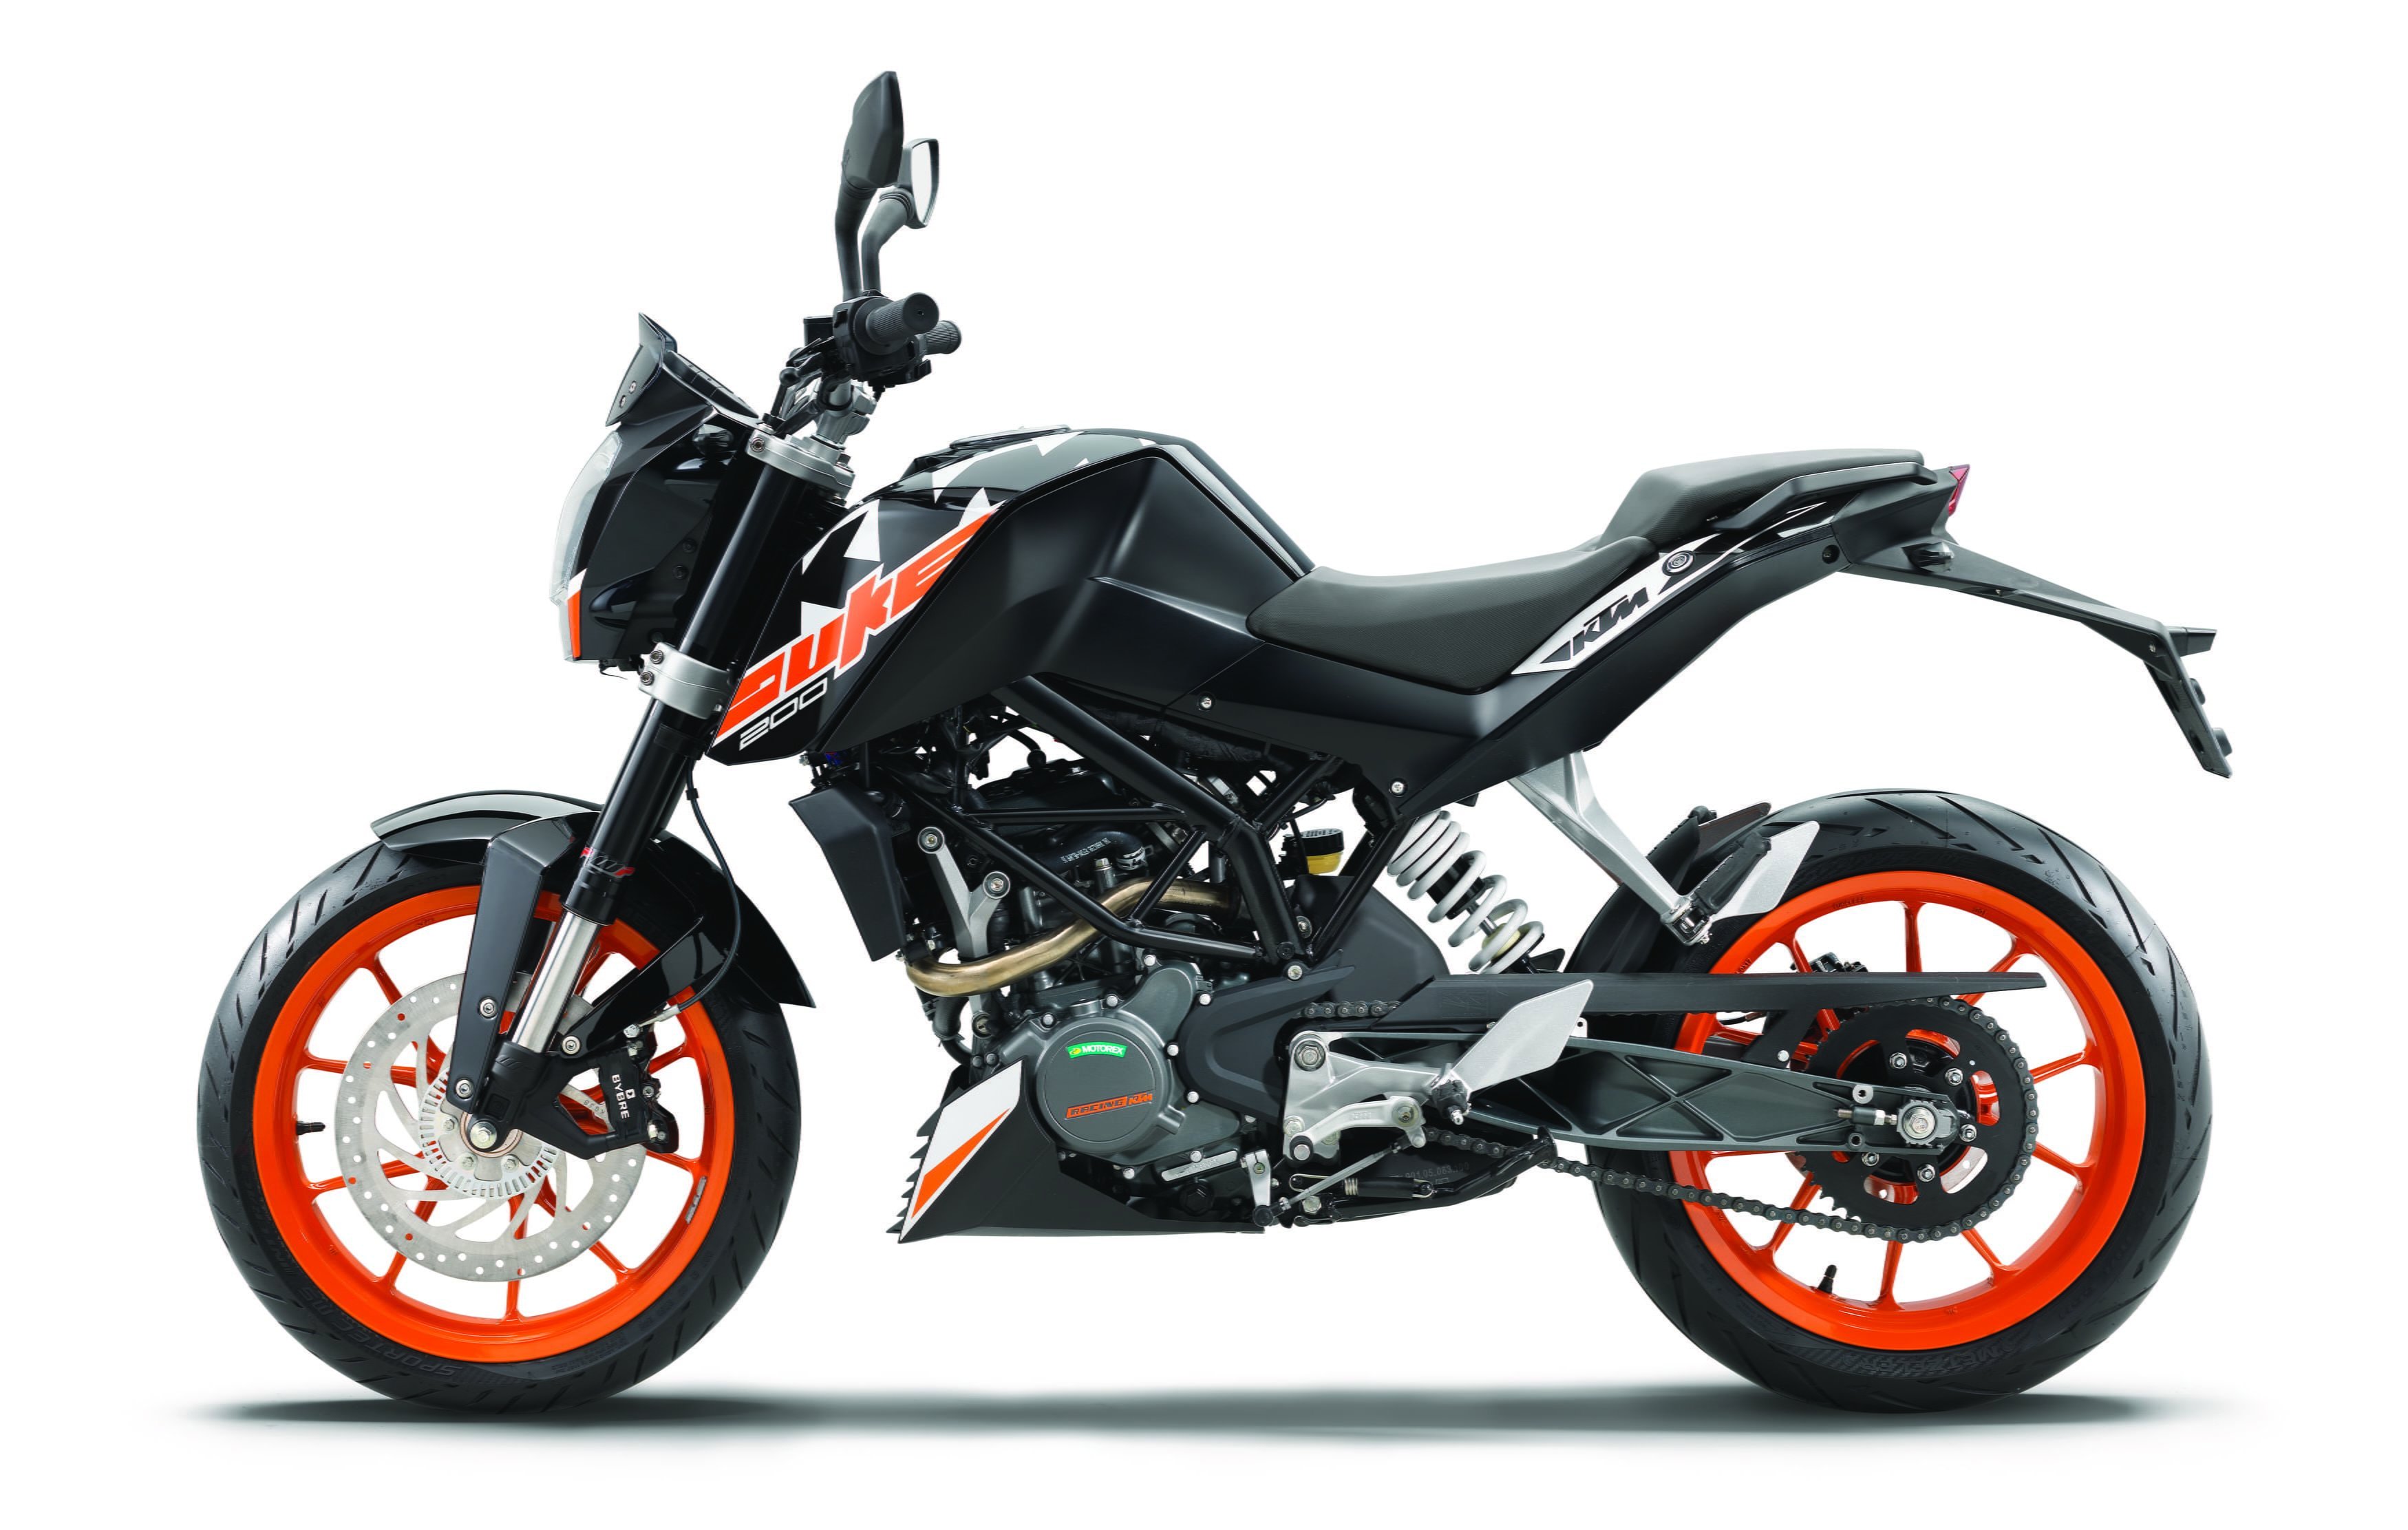 KTM Duke 200 ABS launched in India; priced at Rs 1.60 lakh